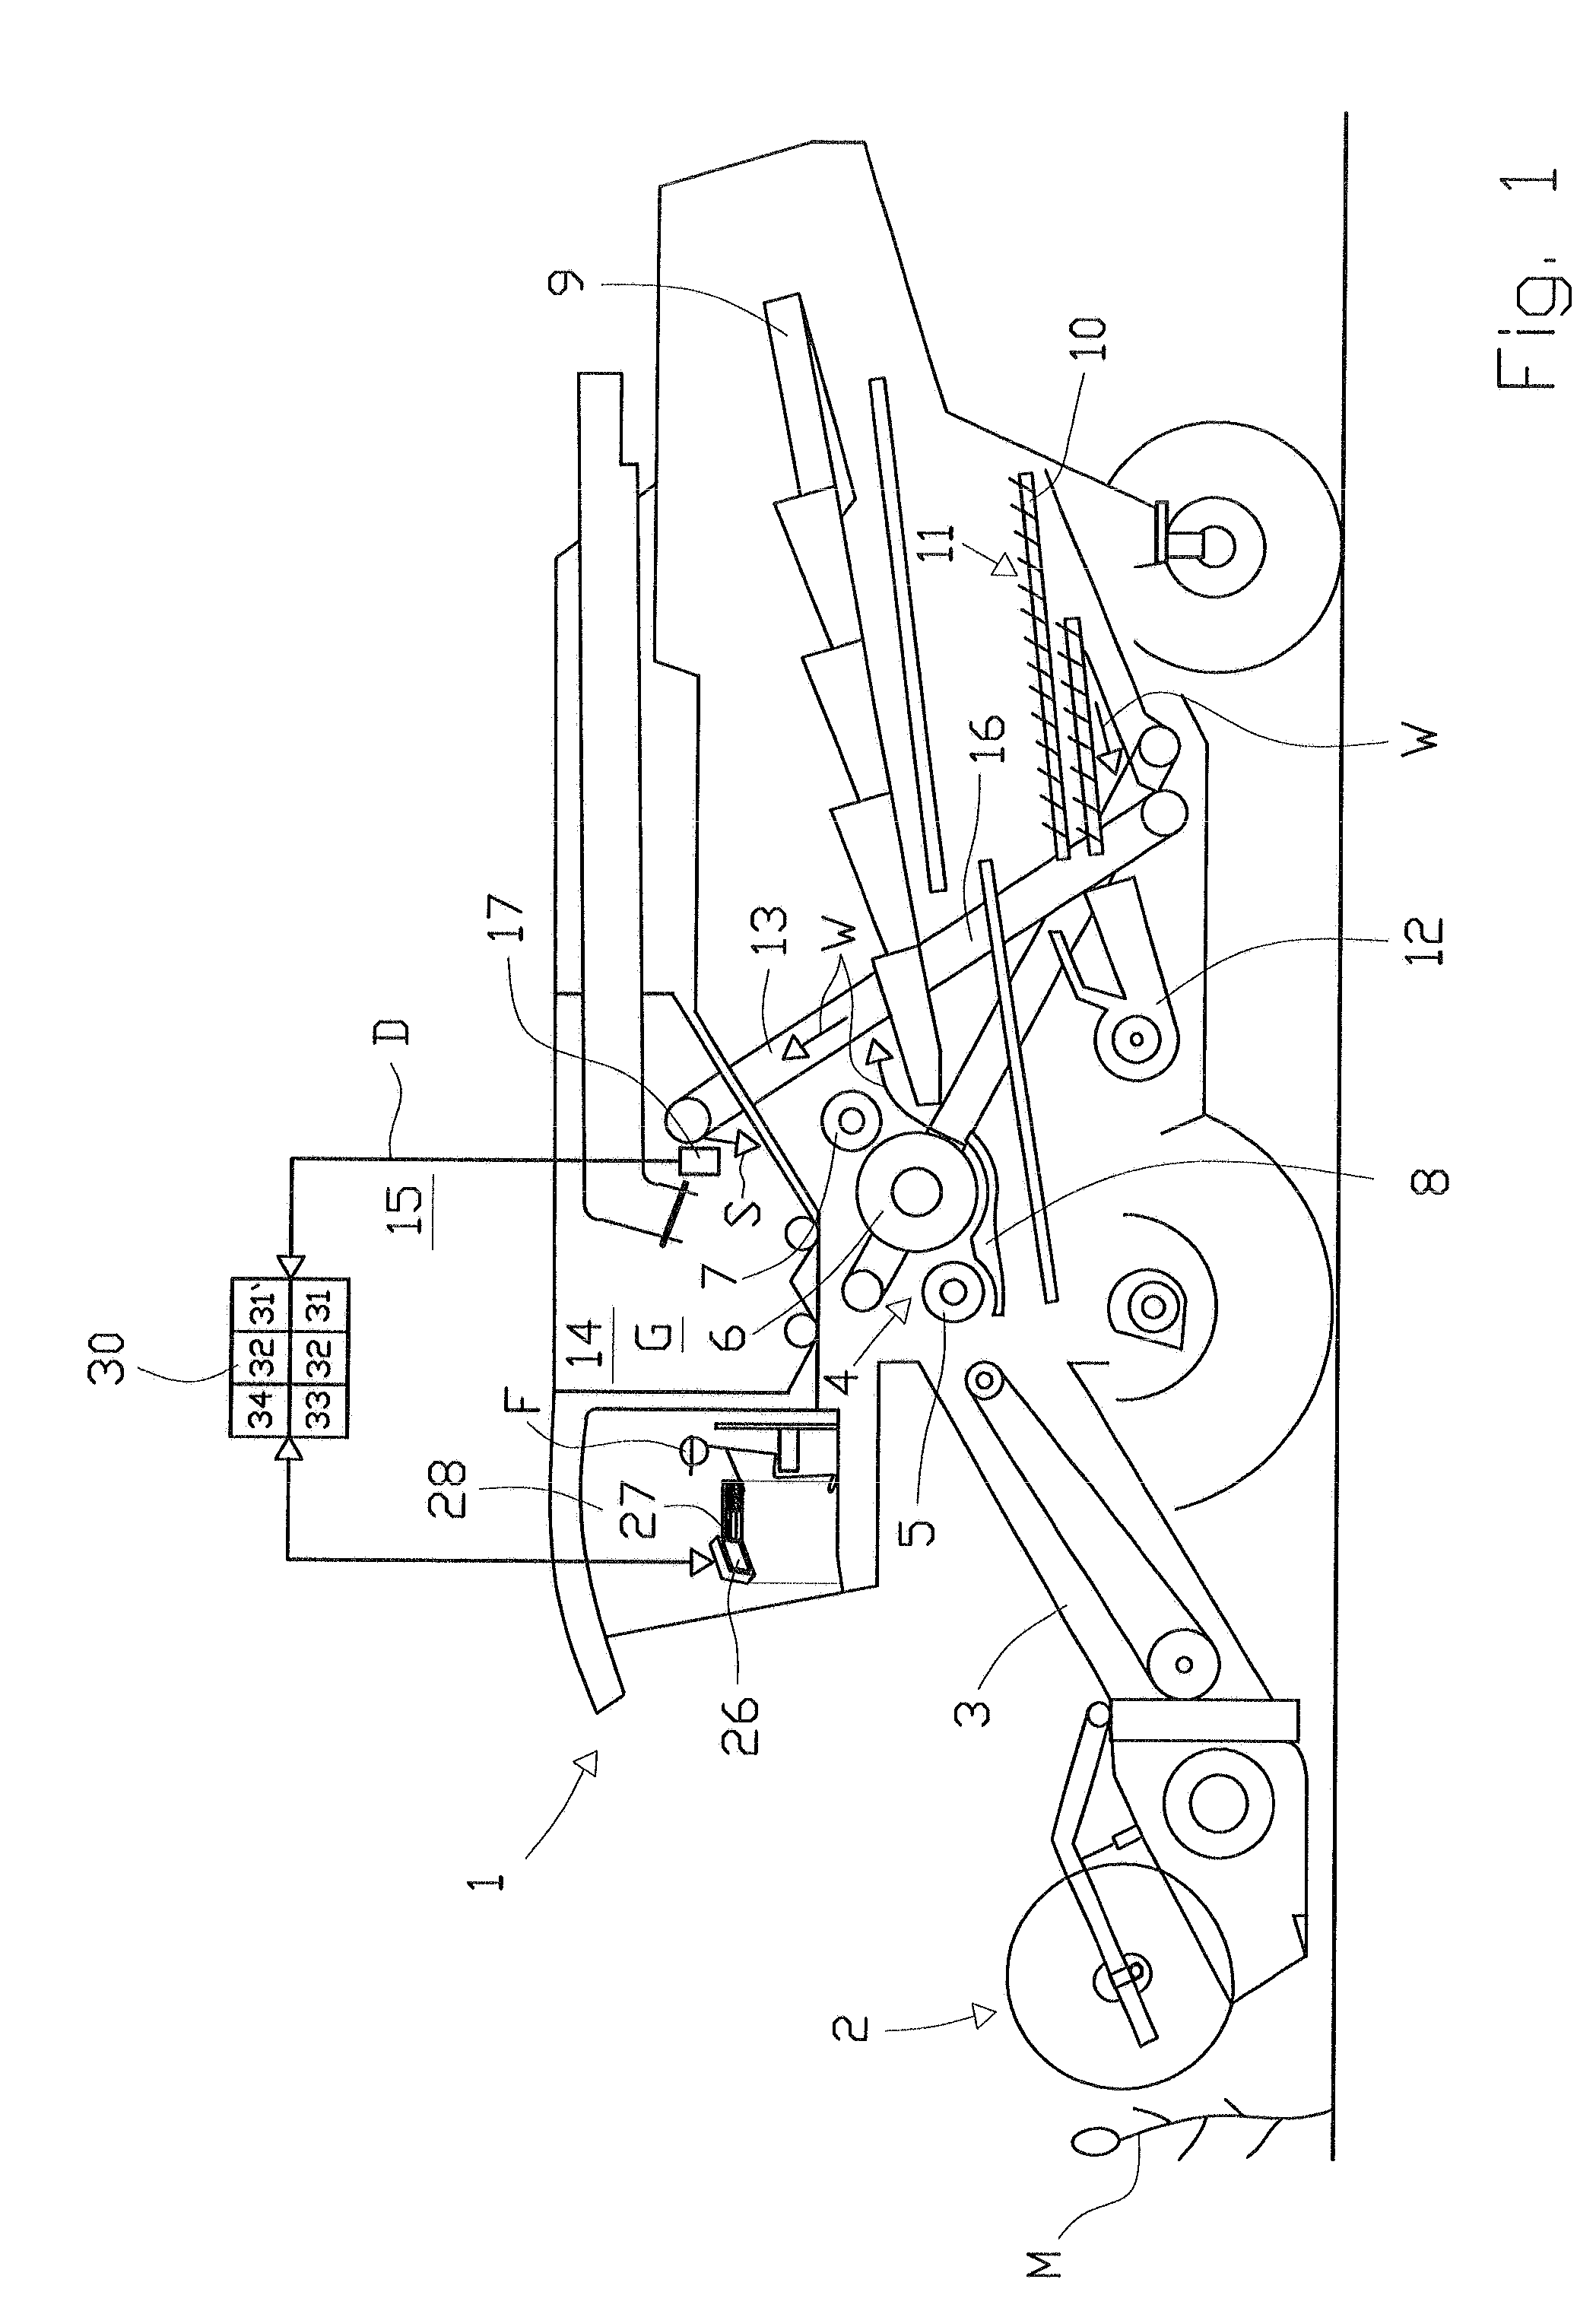 Device for detection and determination of the composition of bulk material